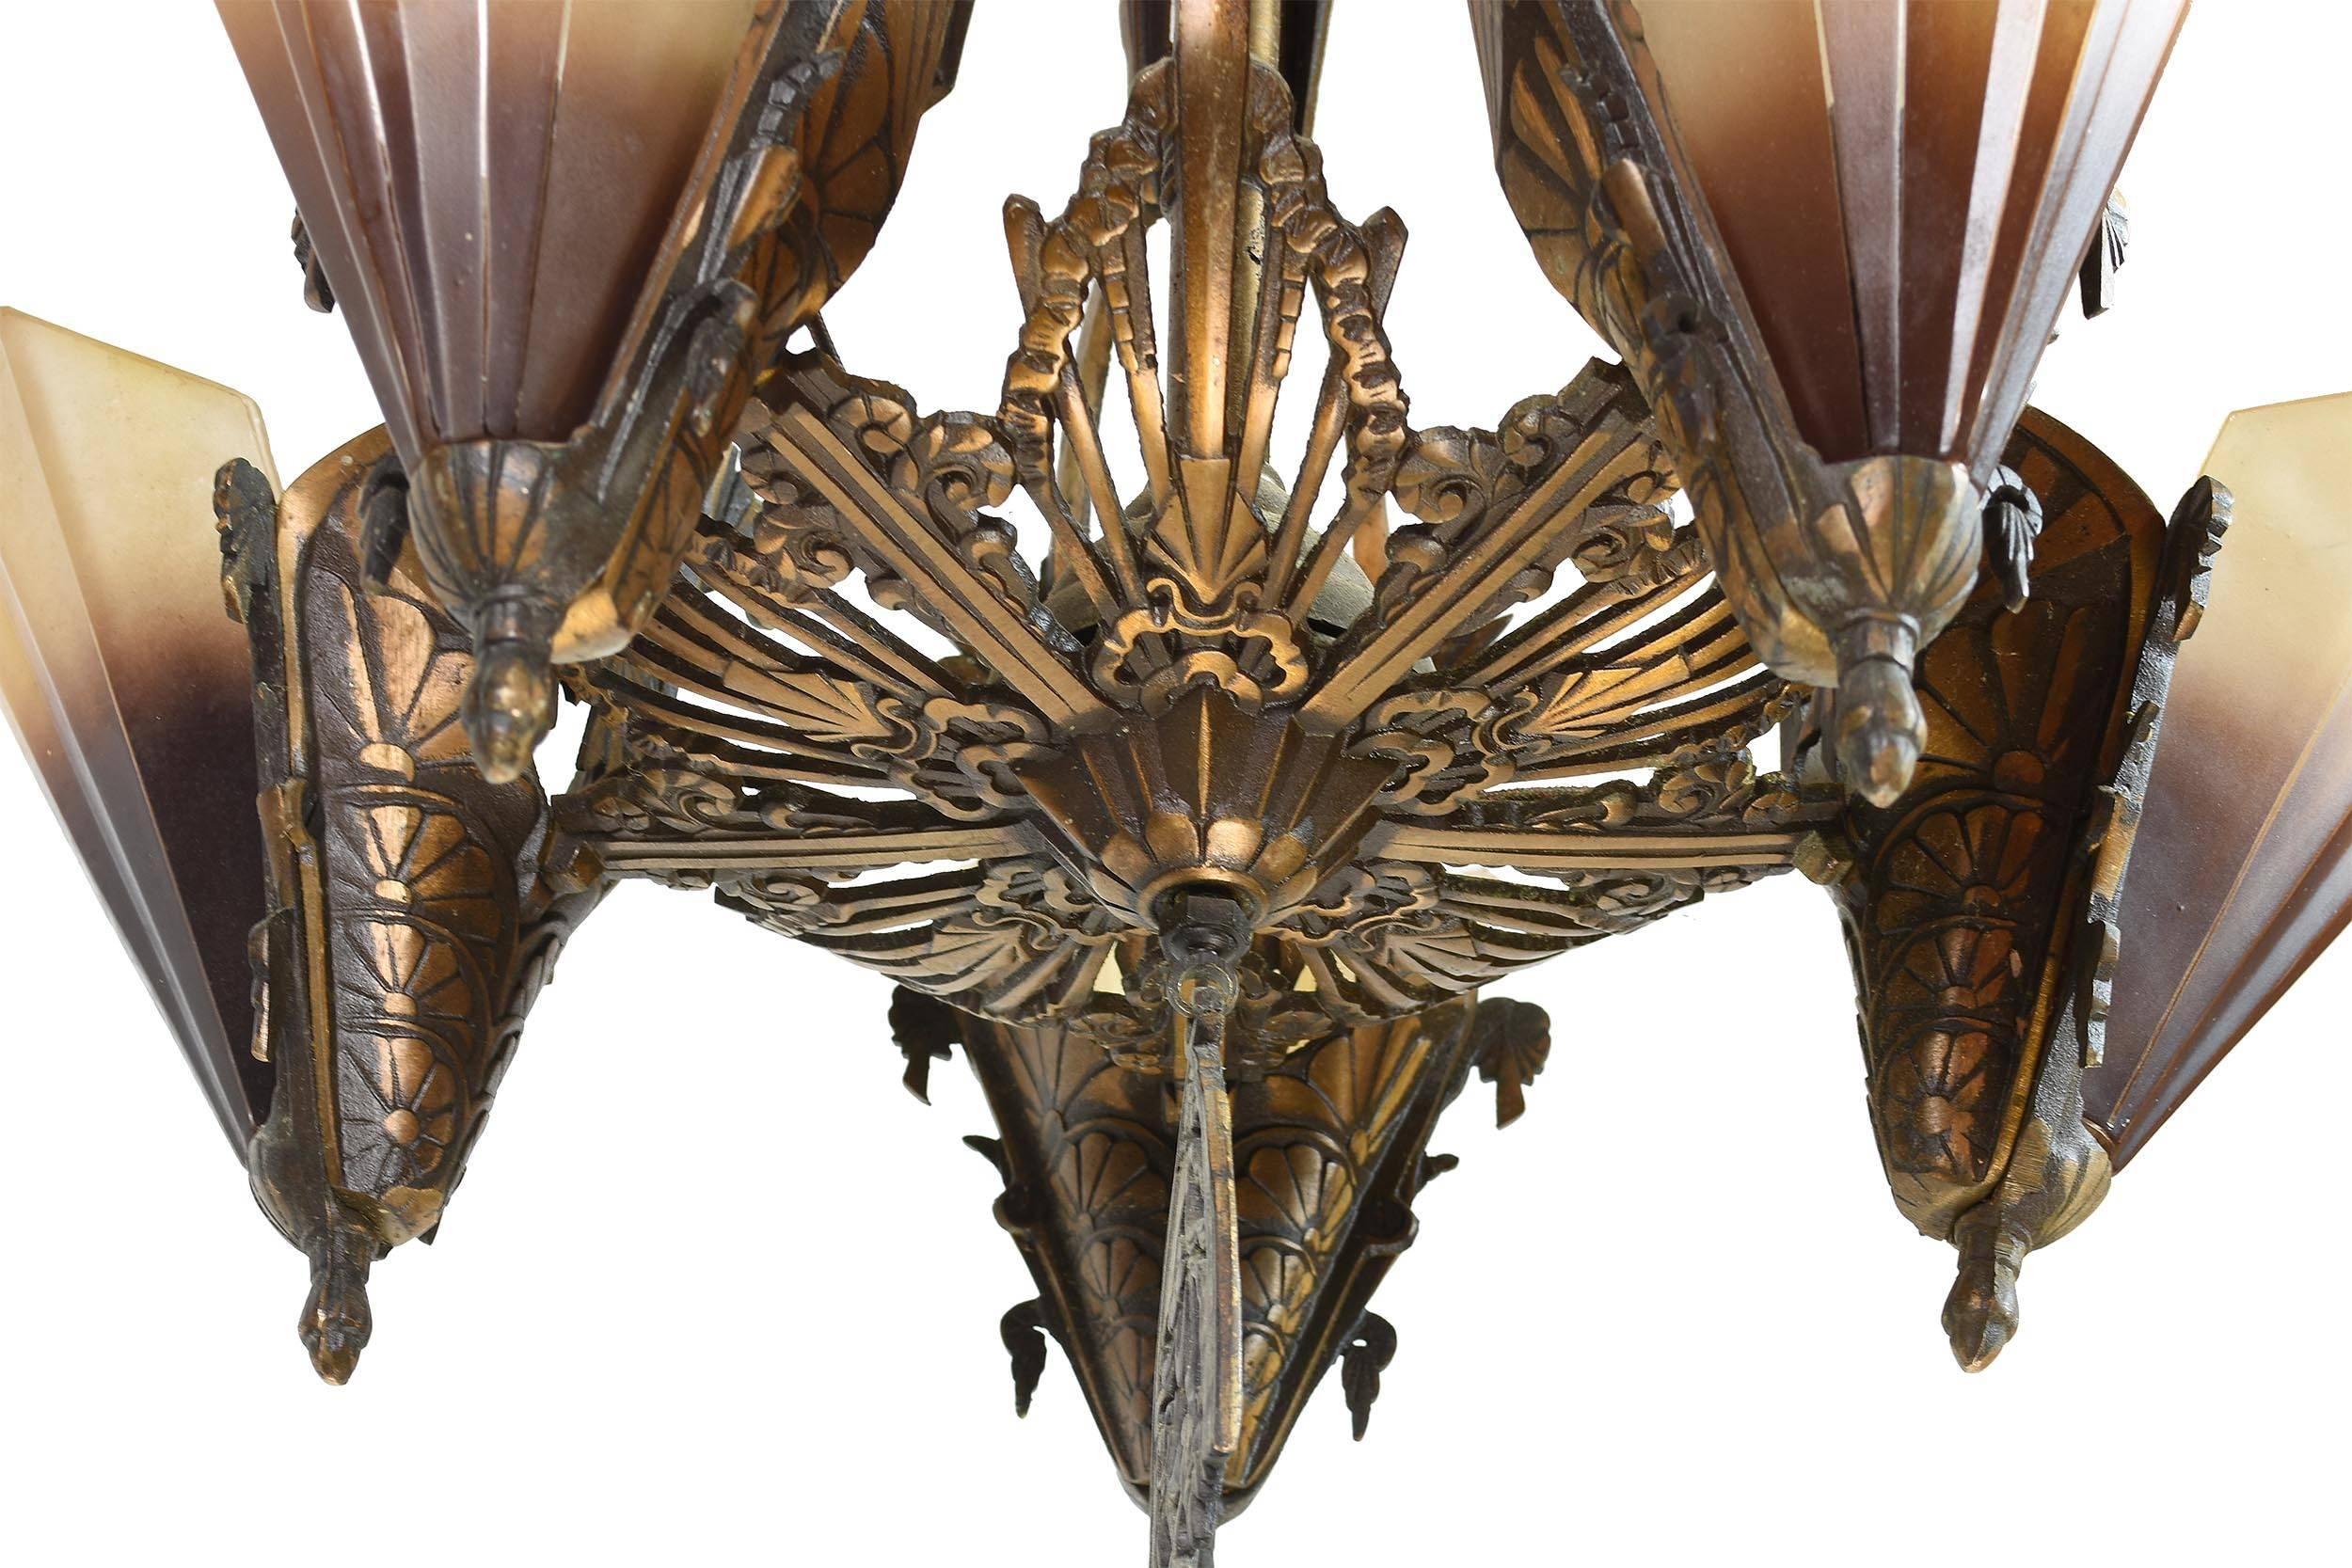 This gorgeous bronze slipper shade chandelier features intricate, stylized floral designs throughout. Truly no surface has gone untouched in terms of detail, and the viewer is rewarded with a plethora of lush patterns from every angle. The elongated